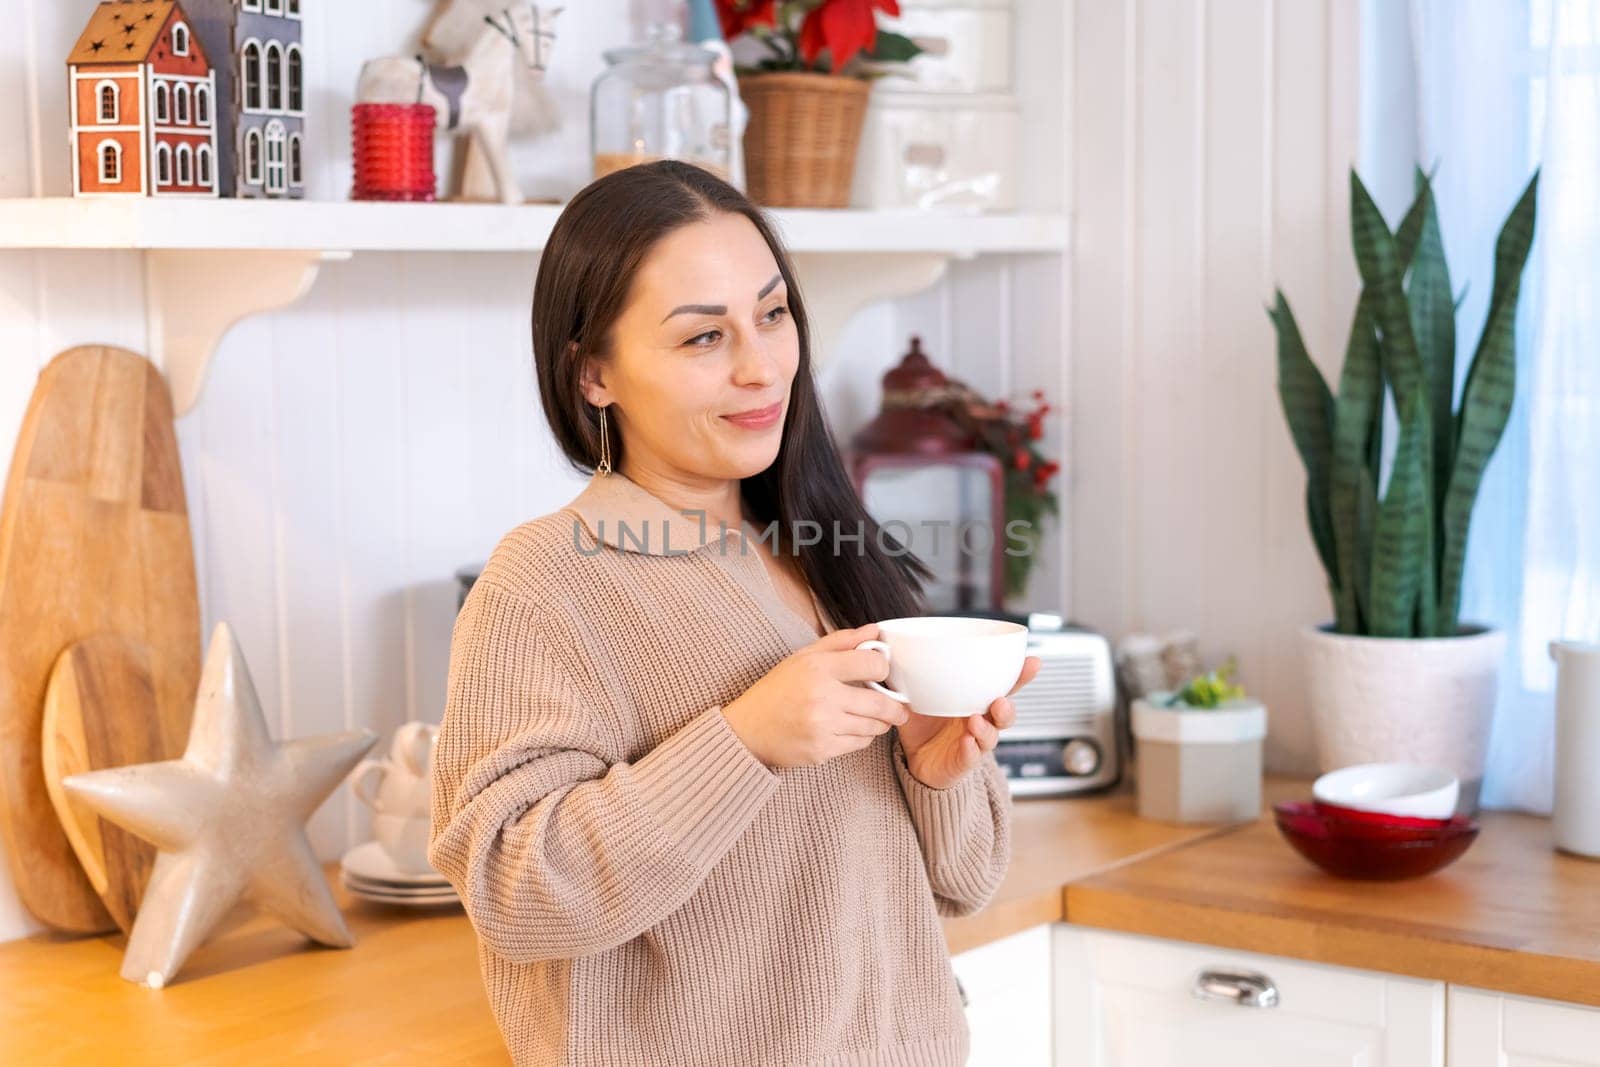 Concept festive Christmas atmosphere, cute woman drinking tea or coffee in a decorated kitchen wearing a sweater